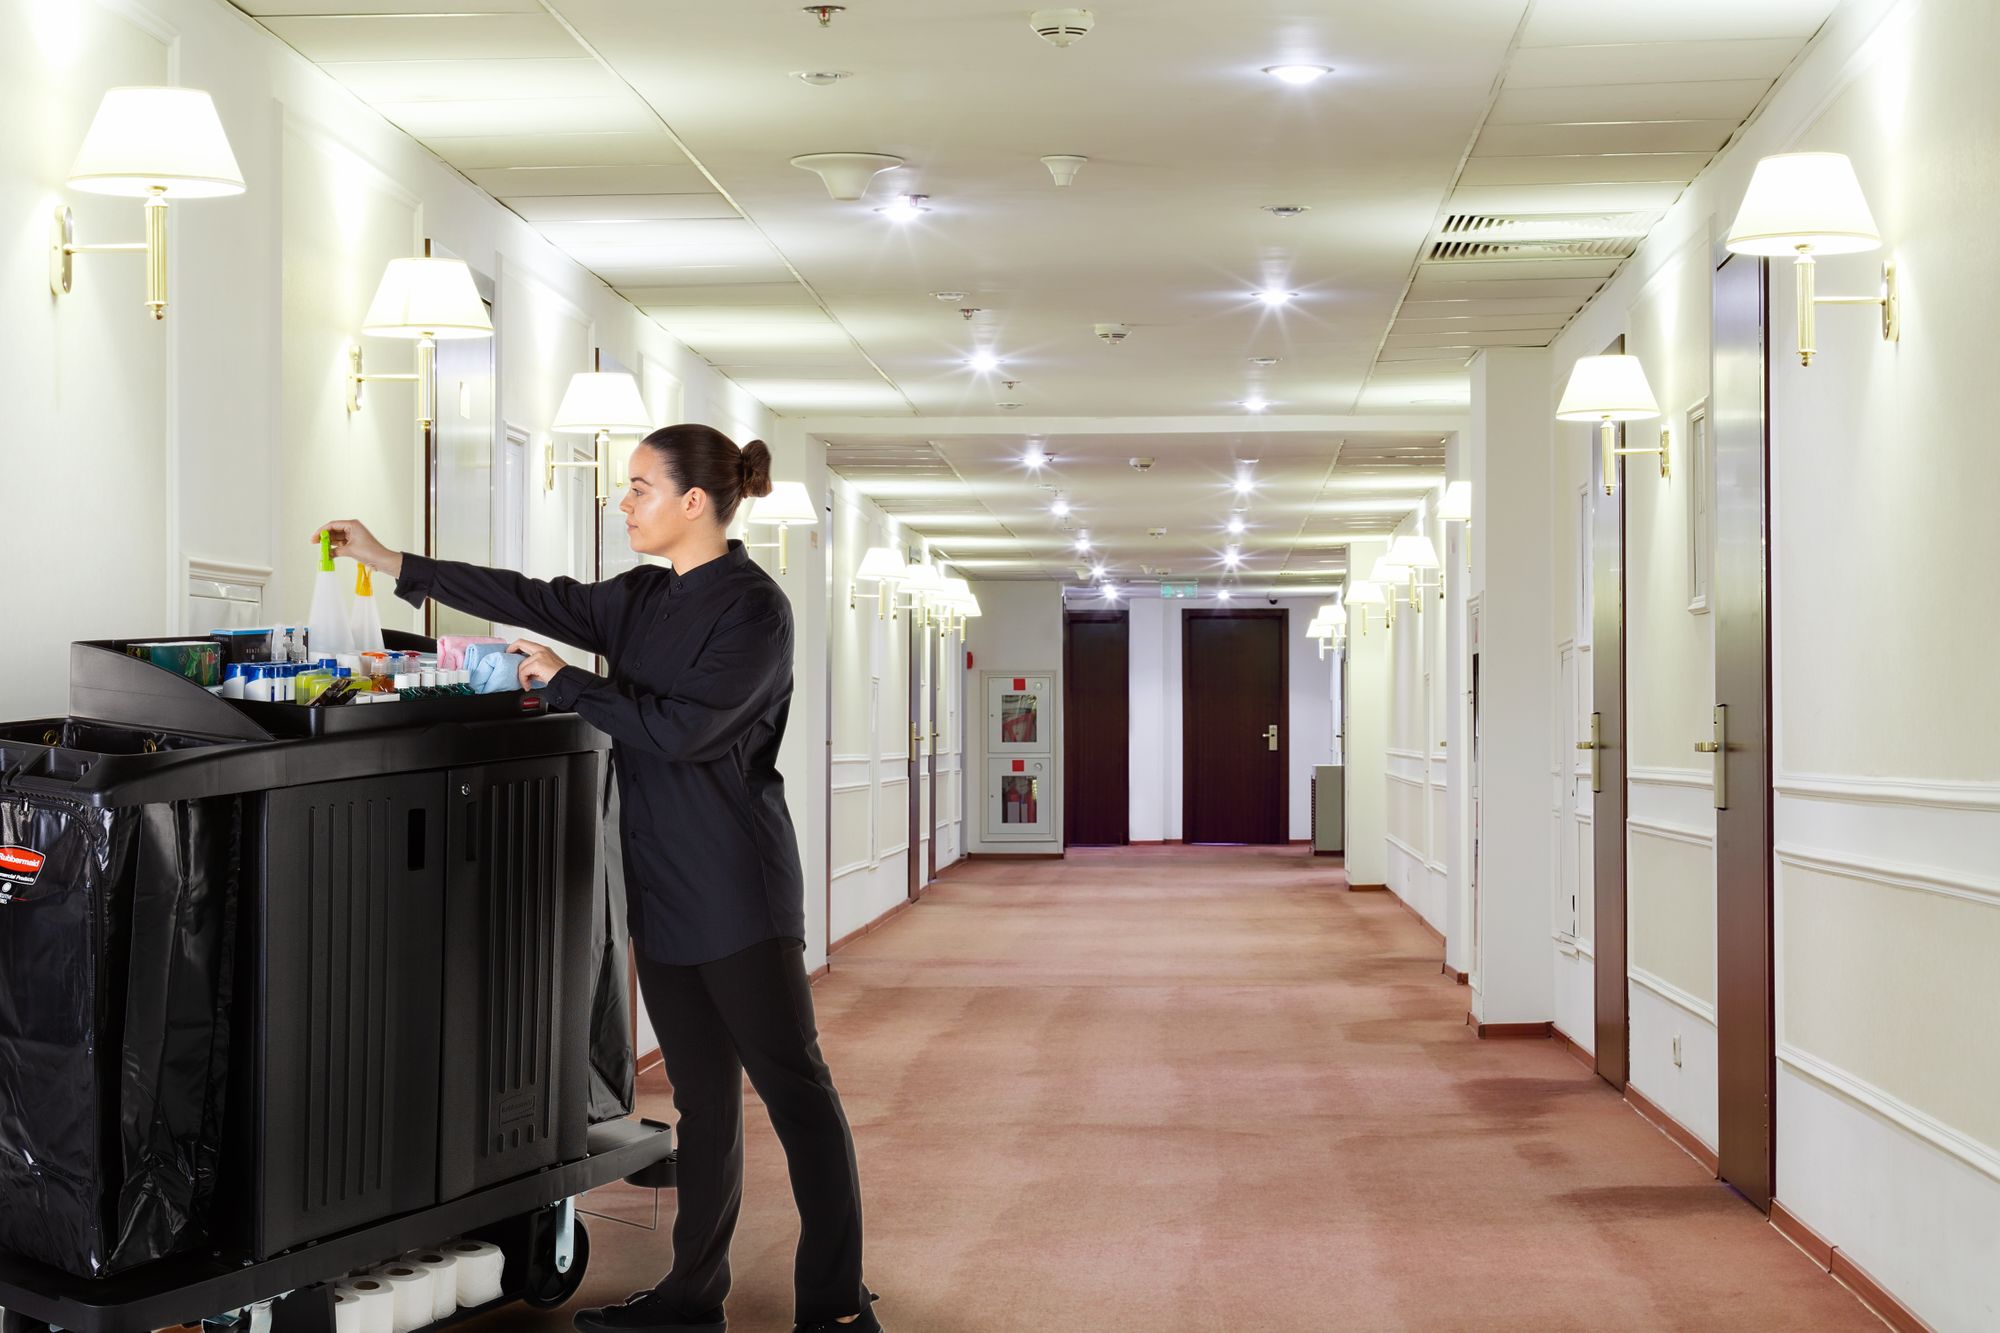 Strategies for Improving Cleanliness in Hotels